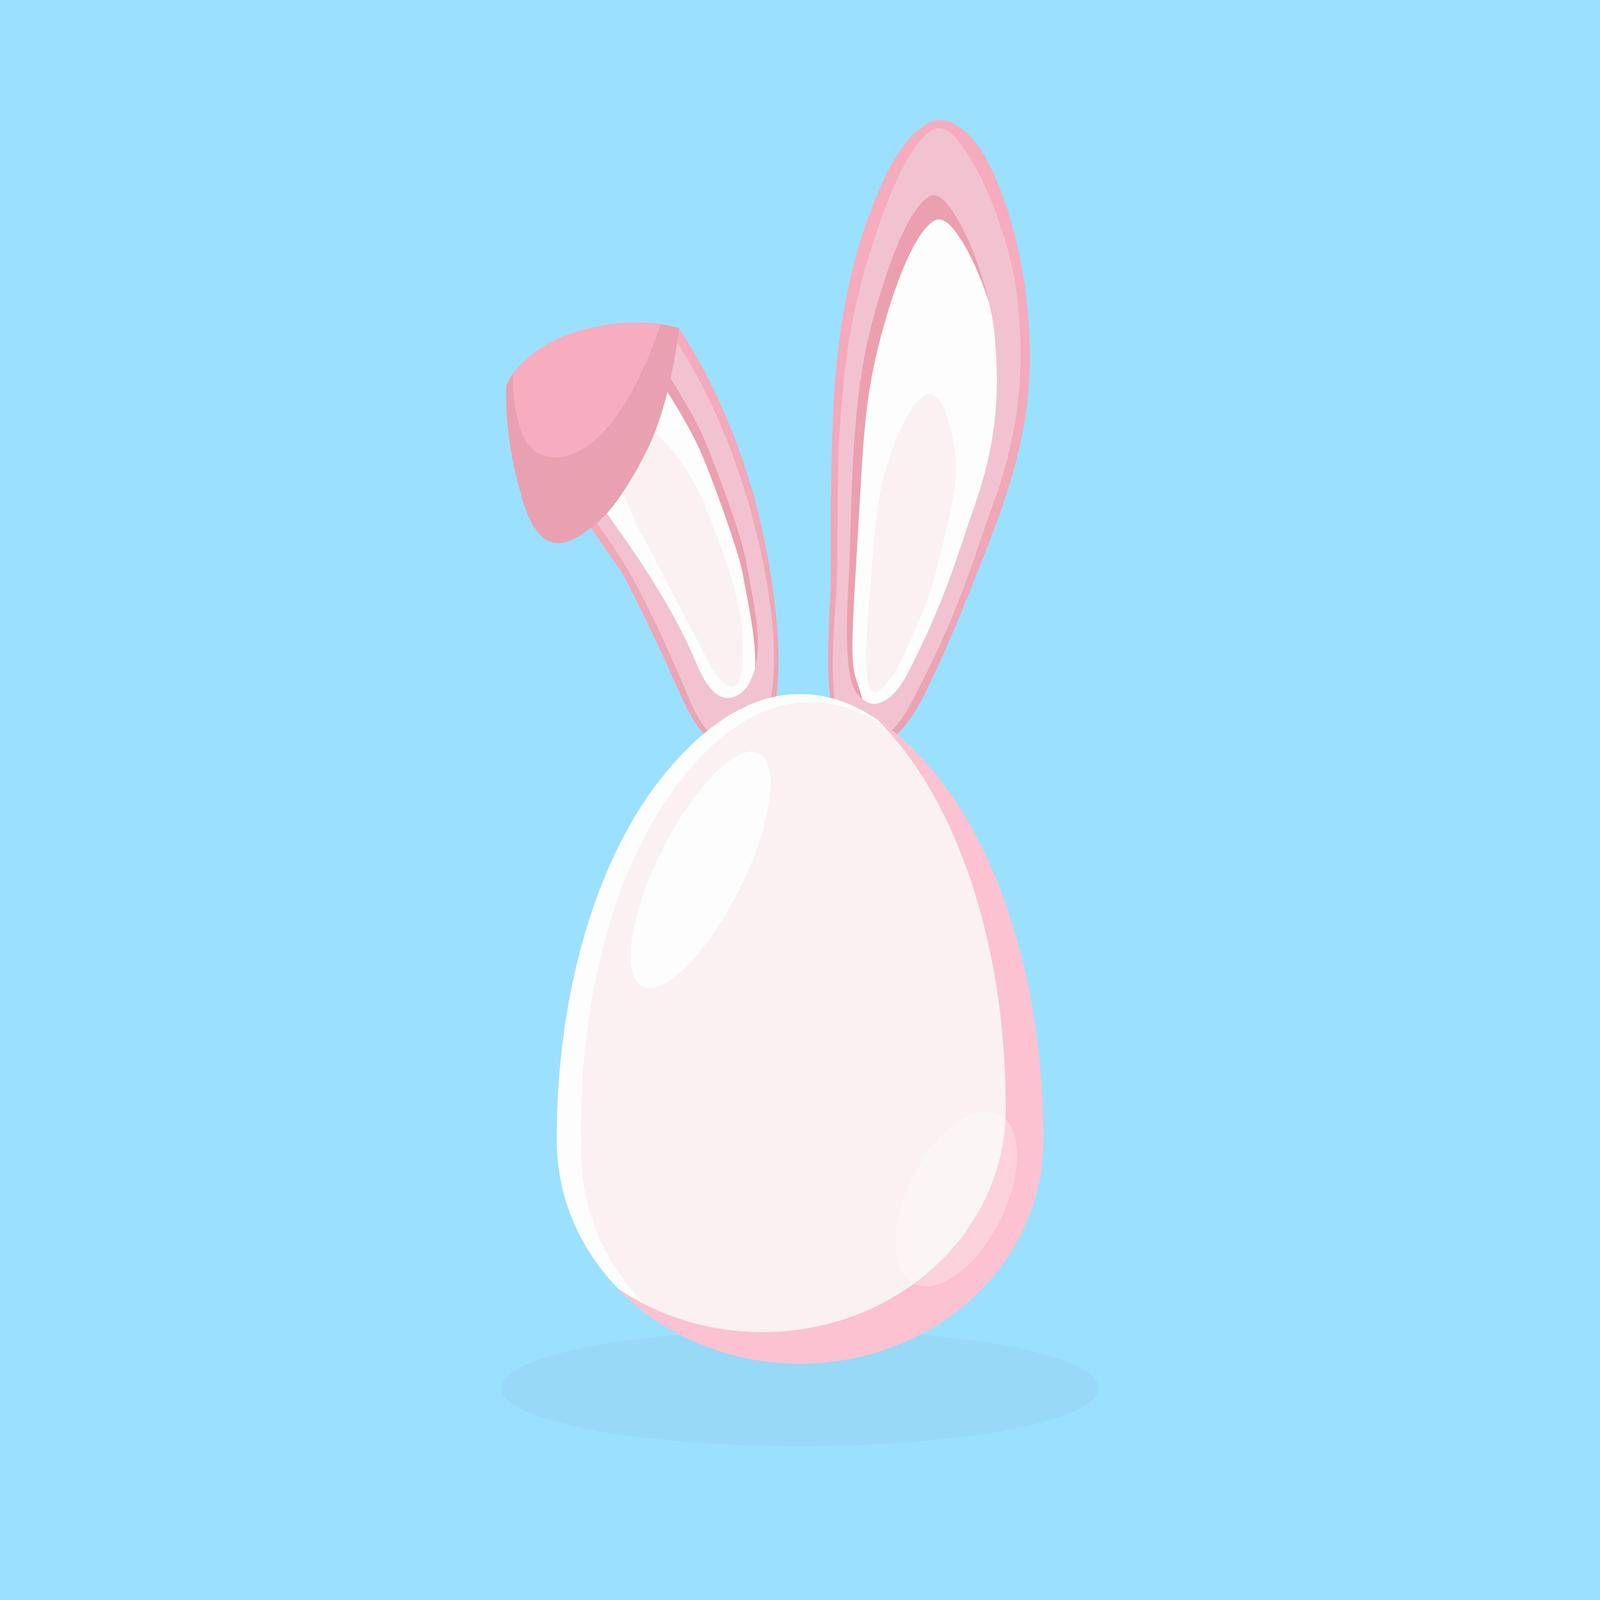 Easter egg with cute bunny ears - traditional symbol of holiday. Simple eggs hunt design. Vector illustration for poster, card or banner.